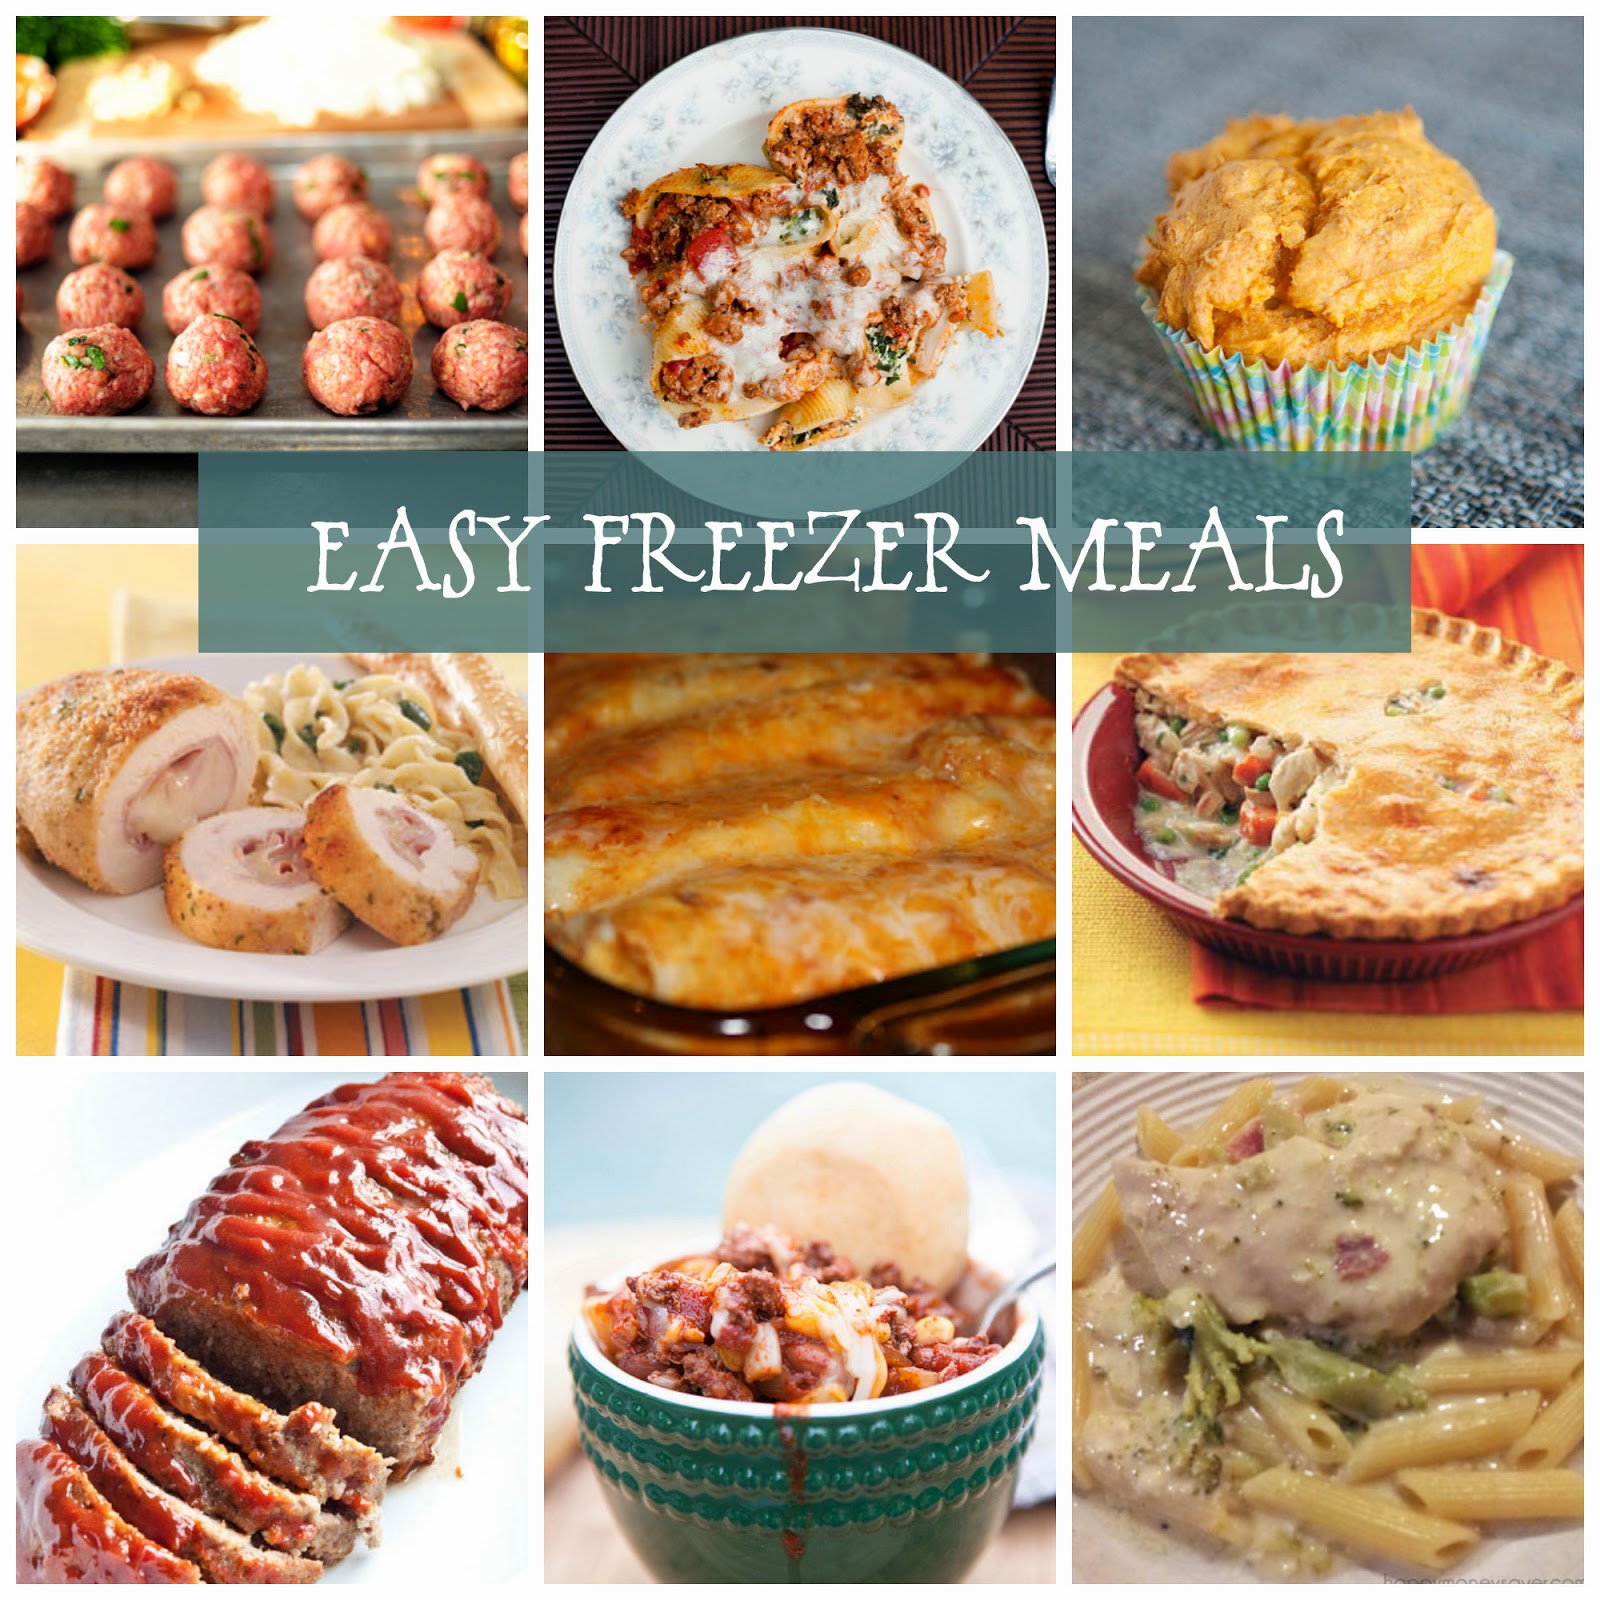 Serve It At Home : What is a FREEZER Meal Workshop?